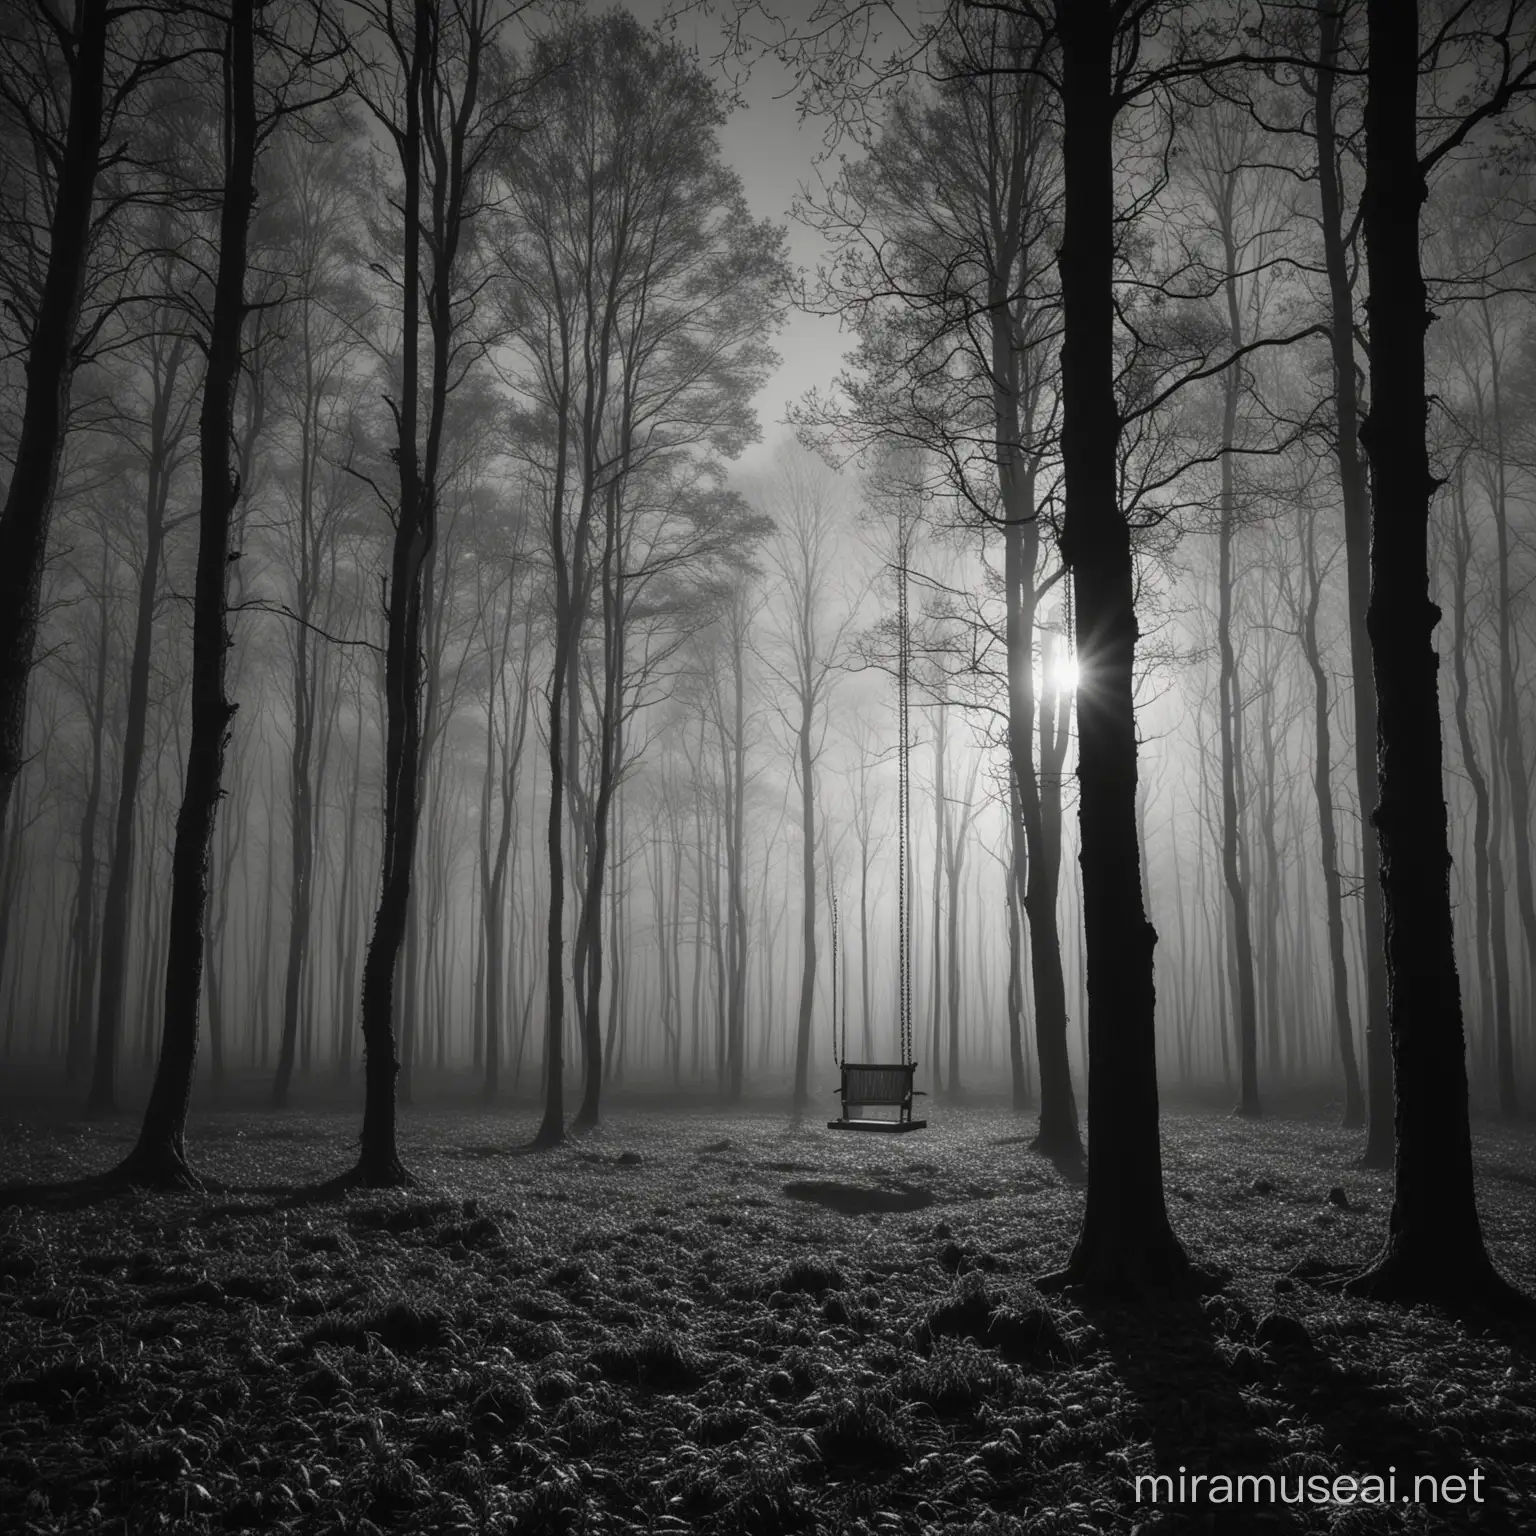 Nighttime Swing in Misty Forest Atmospheric Monochrome Photography